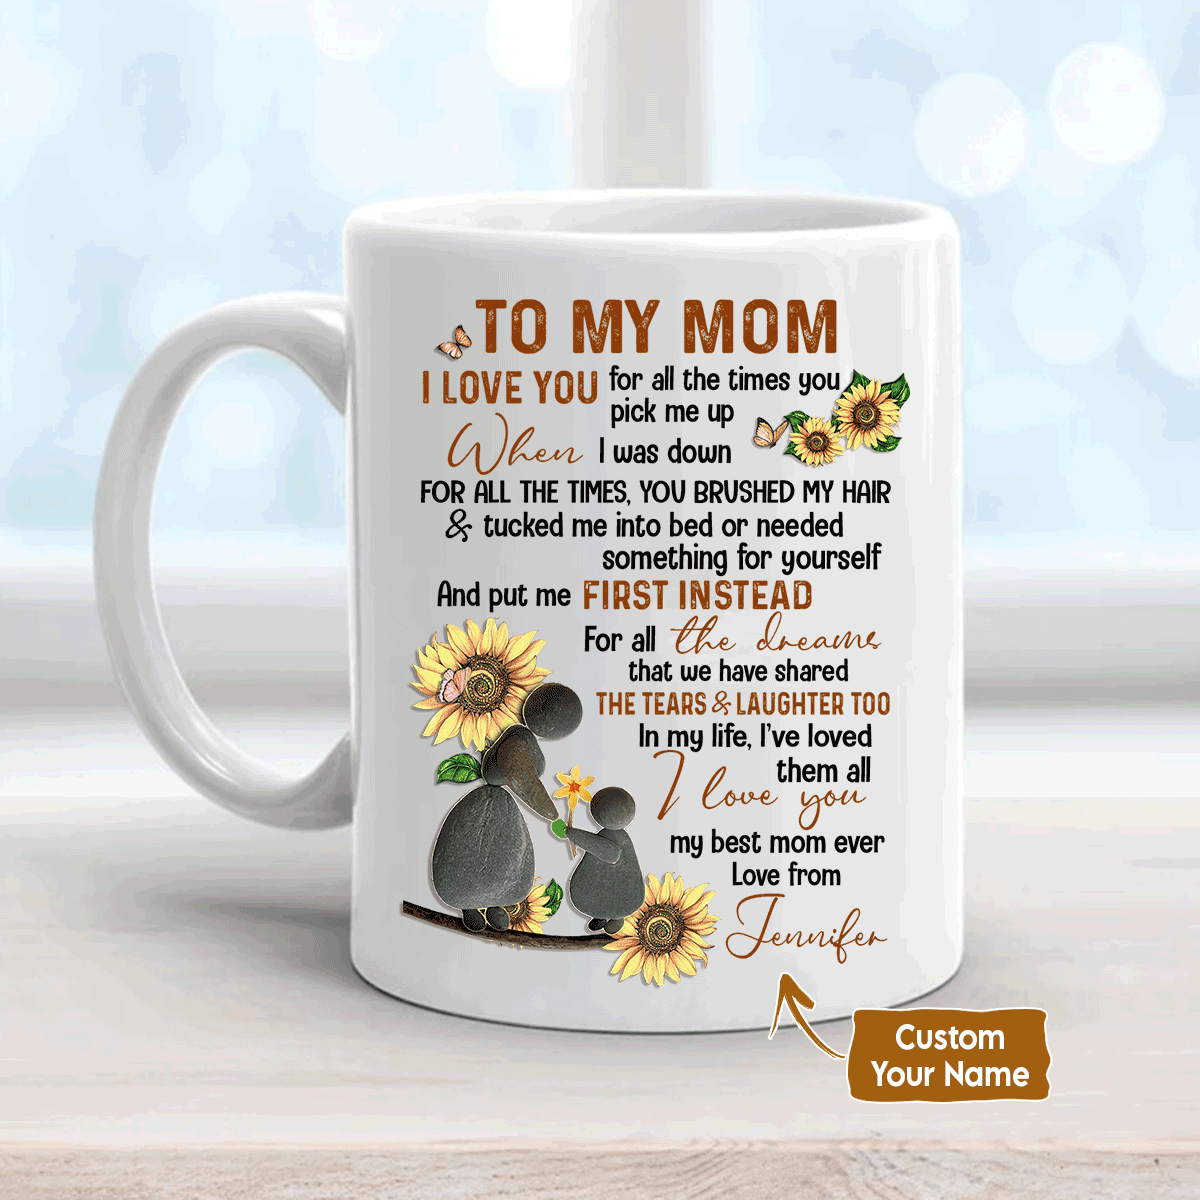 28 Mothers Day Gift Ideas Every Mom Will Love